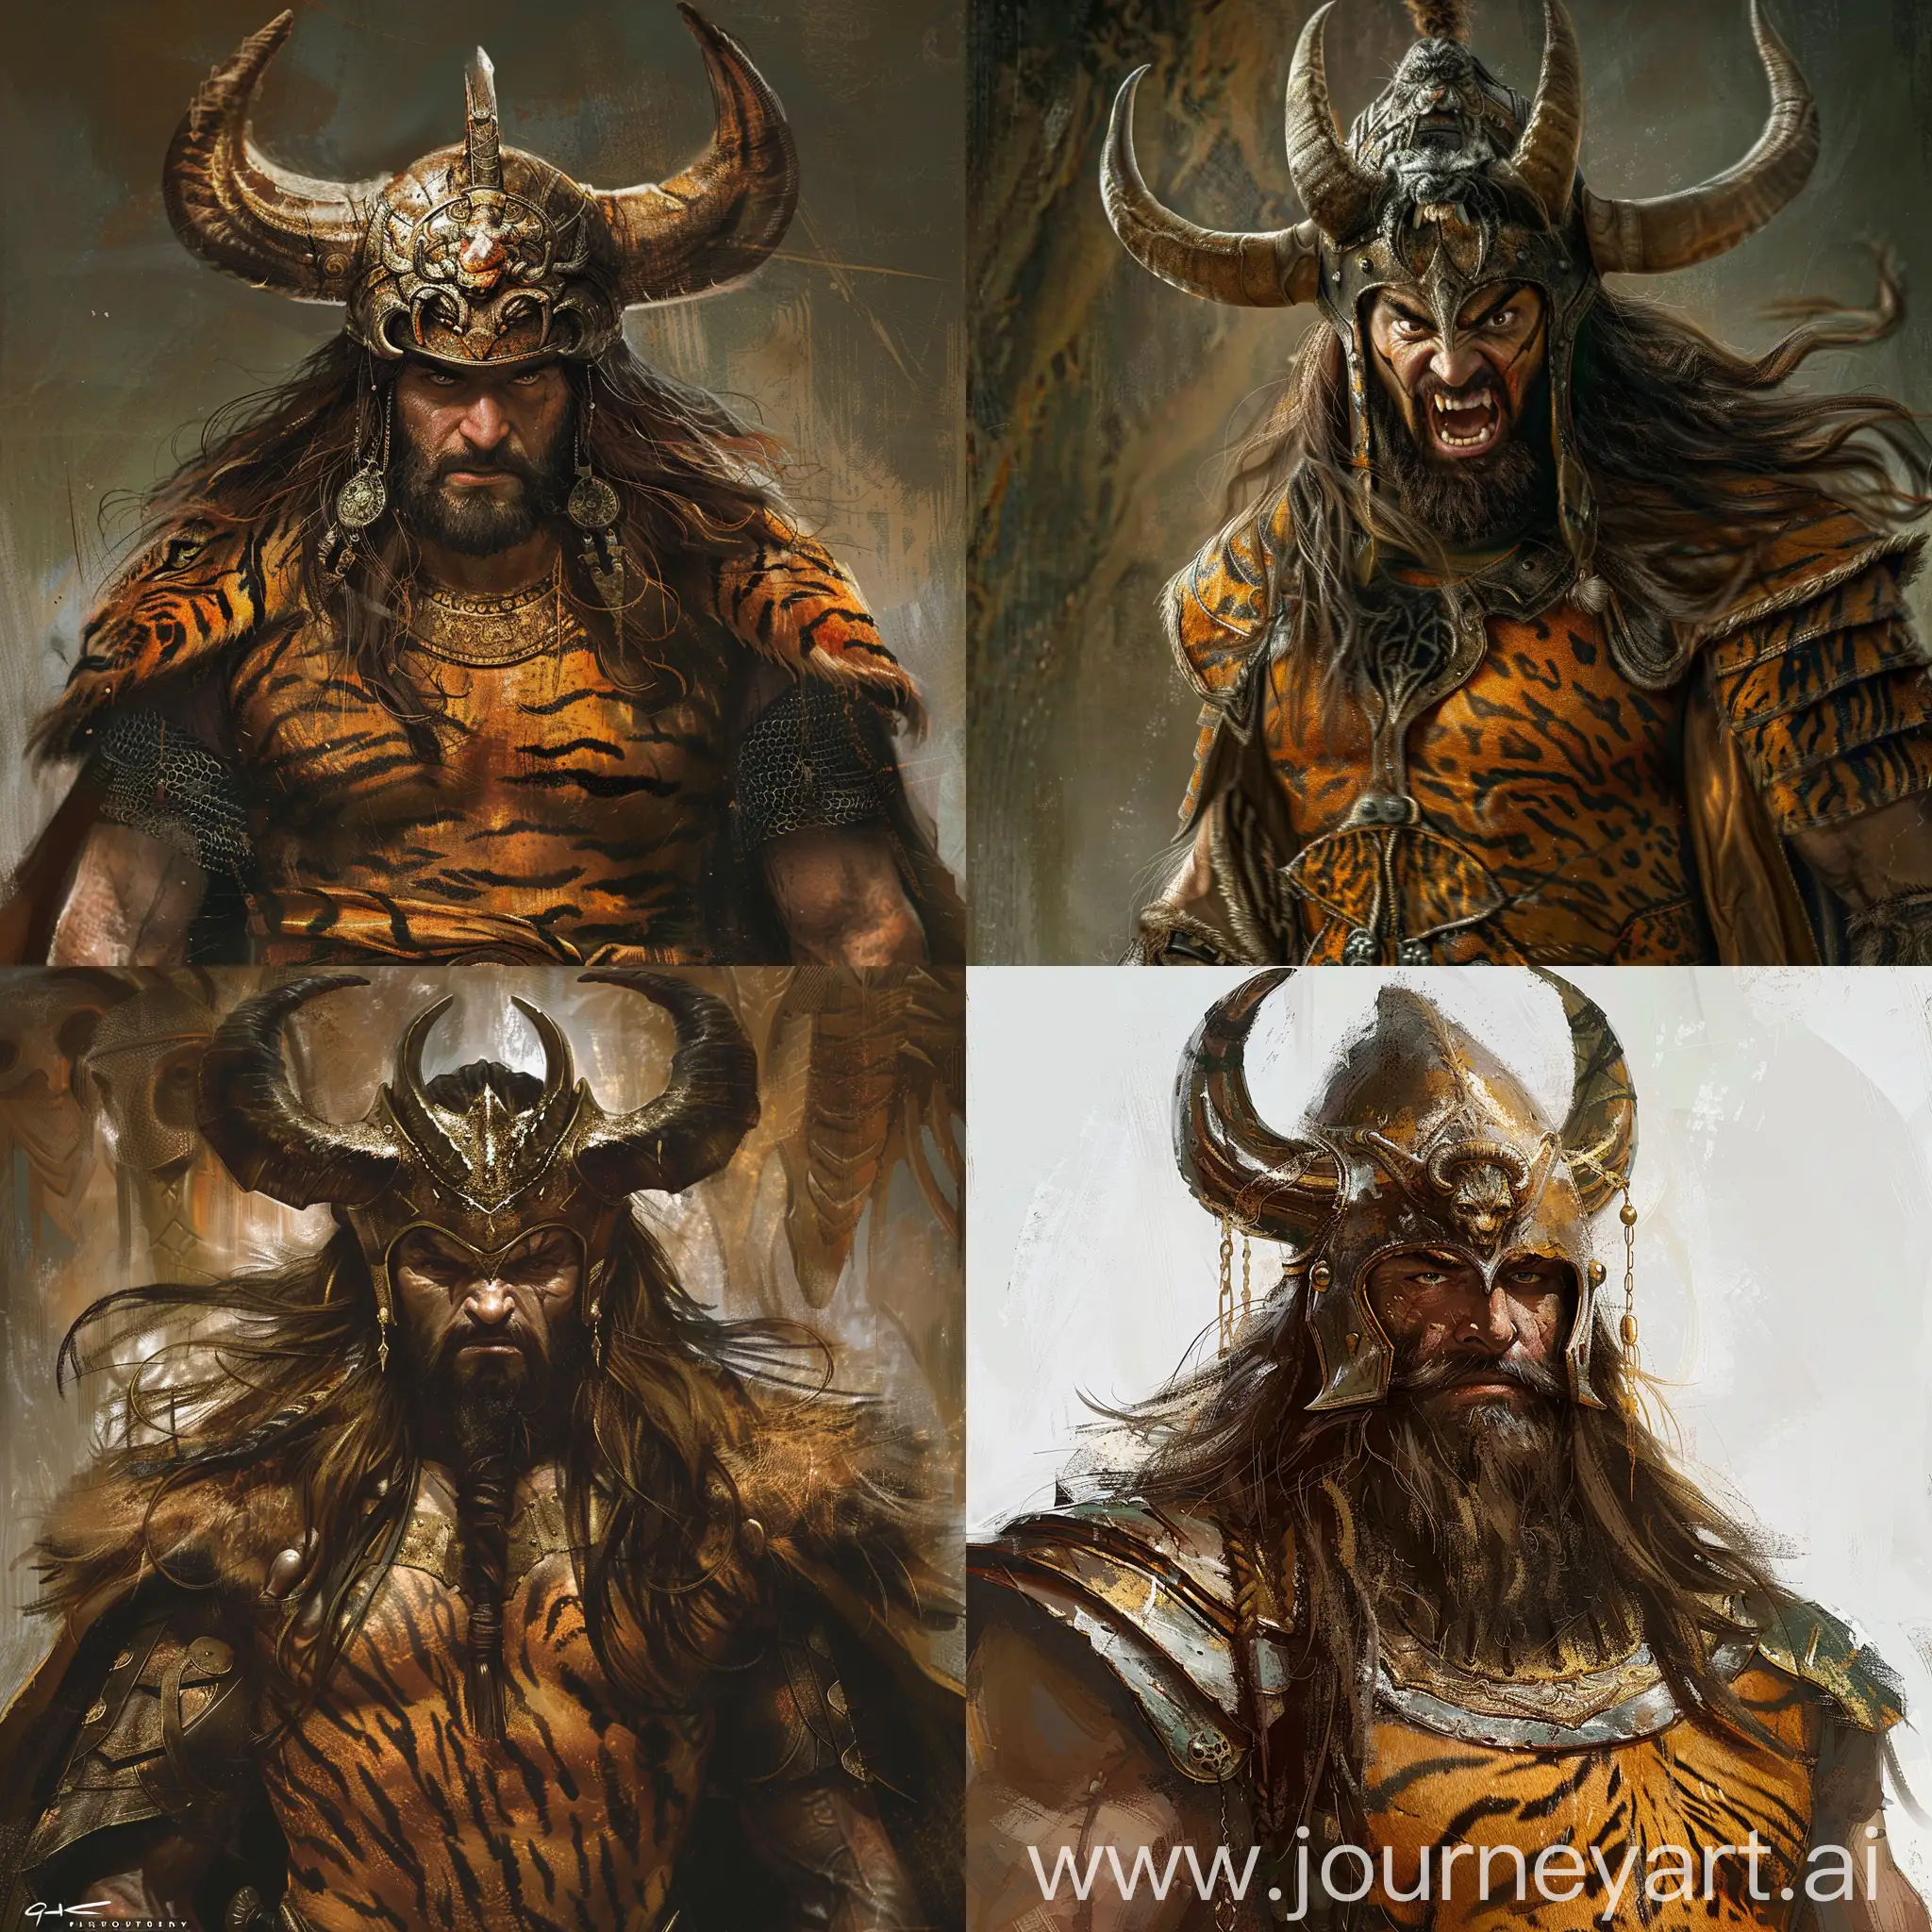 I want you to recreate the face of an ancient Iranian commander in fantasy: a Persian man, his helmet with the face of a horned demon, his face an angry man with long brown hair and beard, a large figure, wearing a tiger skin dress that looks like Armor is leather